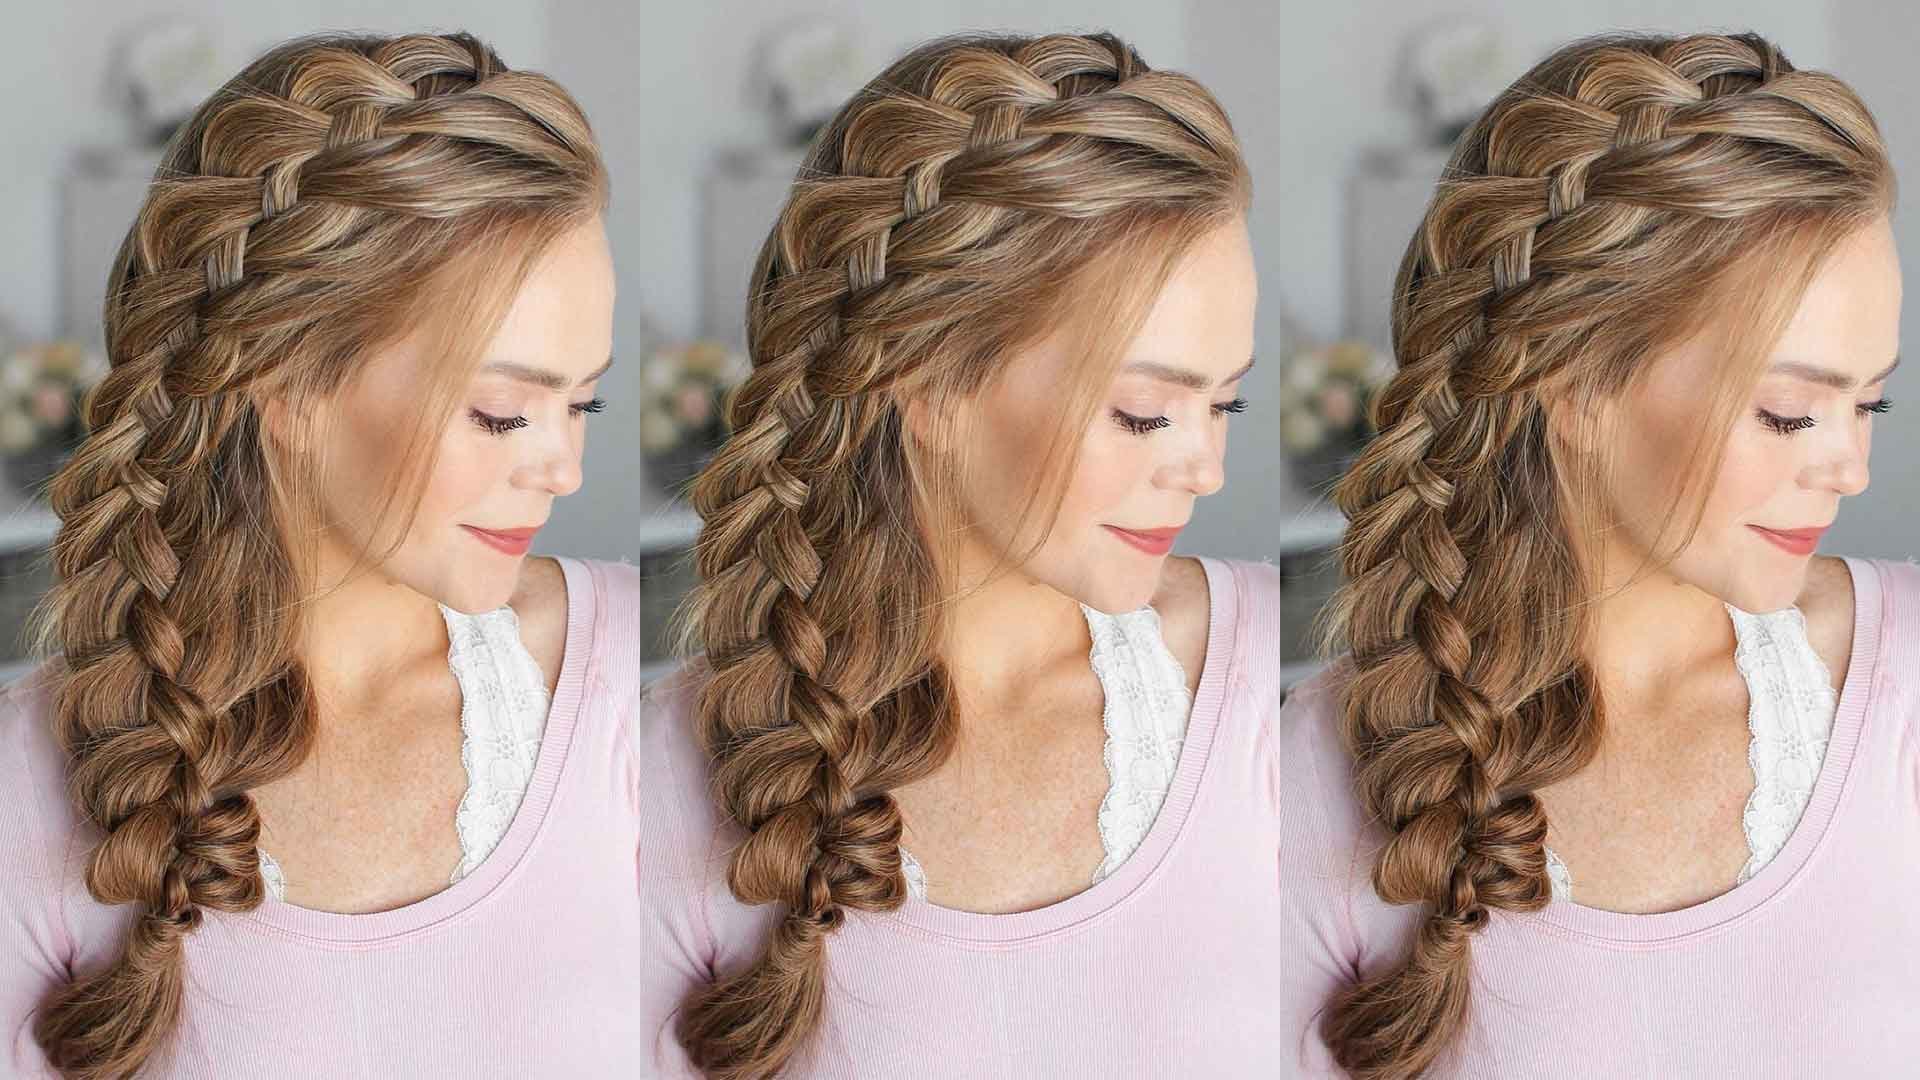 French braid 3  French hair, Thick hair styles, Long hair wedding styles